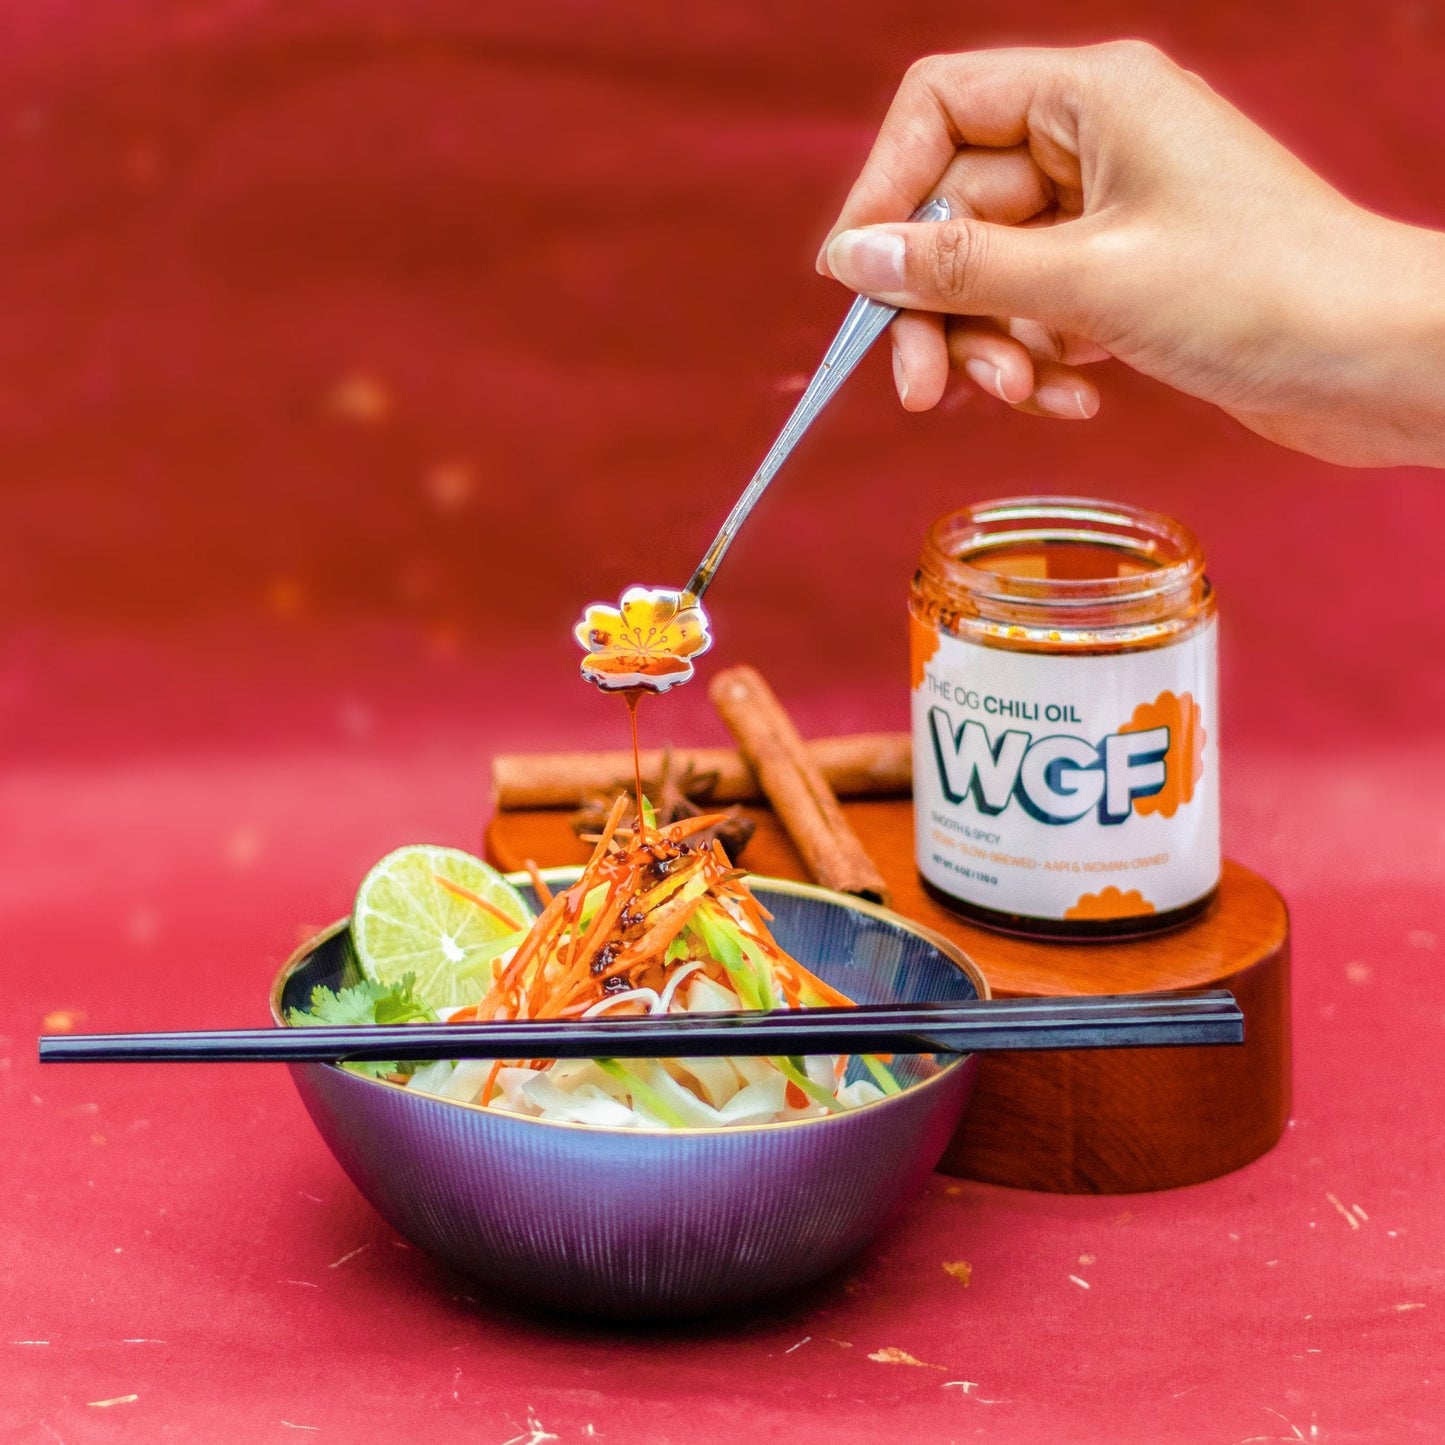 Wei Good Foods OG Chili Oil by Farm2Me